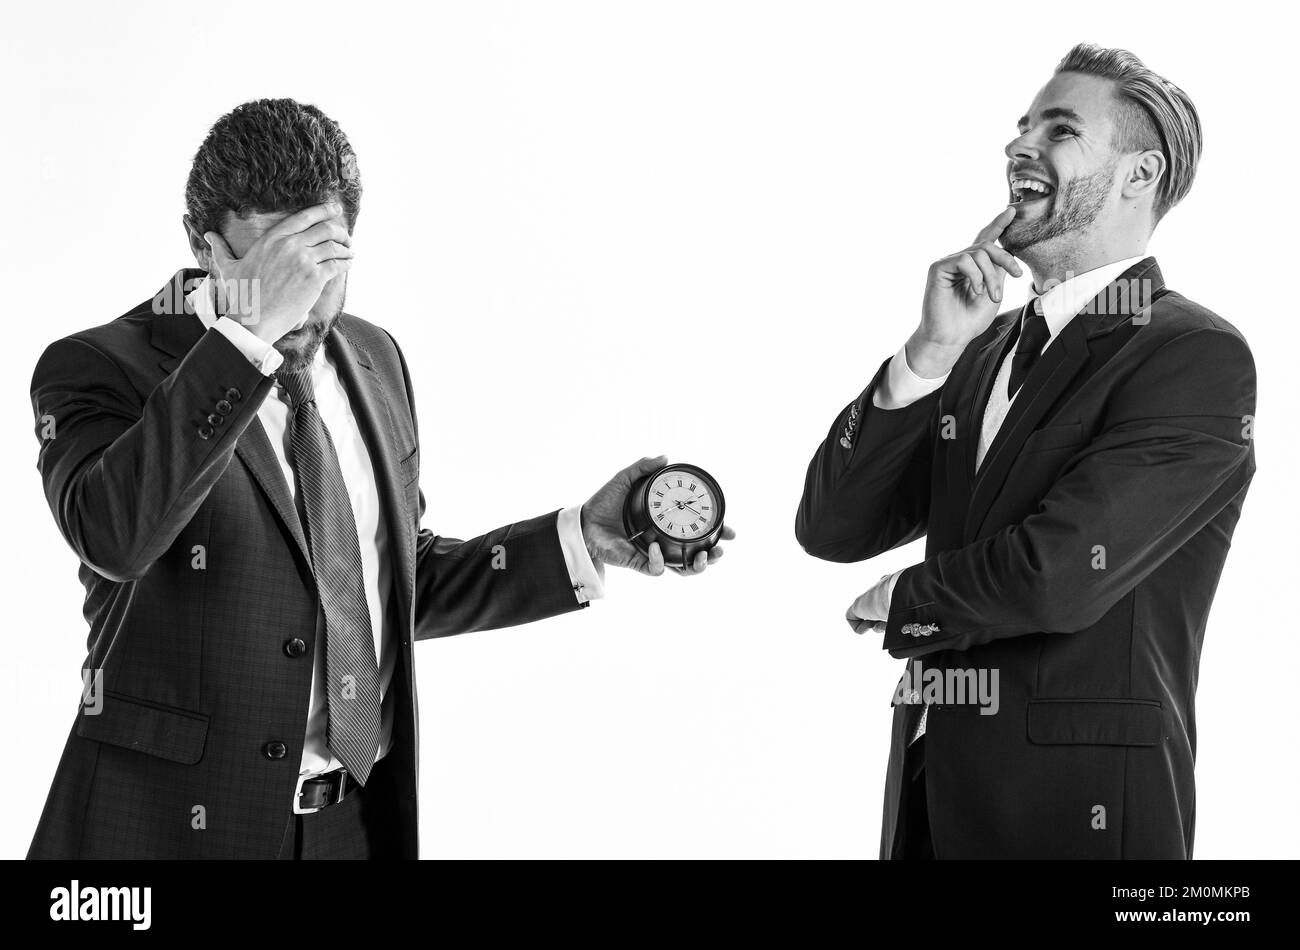 Businessmen misunderstanding about timing. Men in classic suits Stock Photo